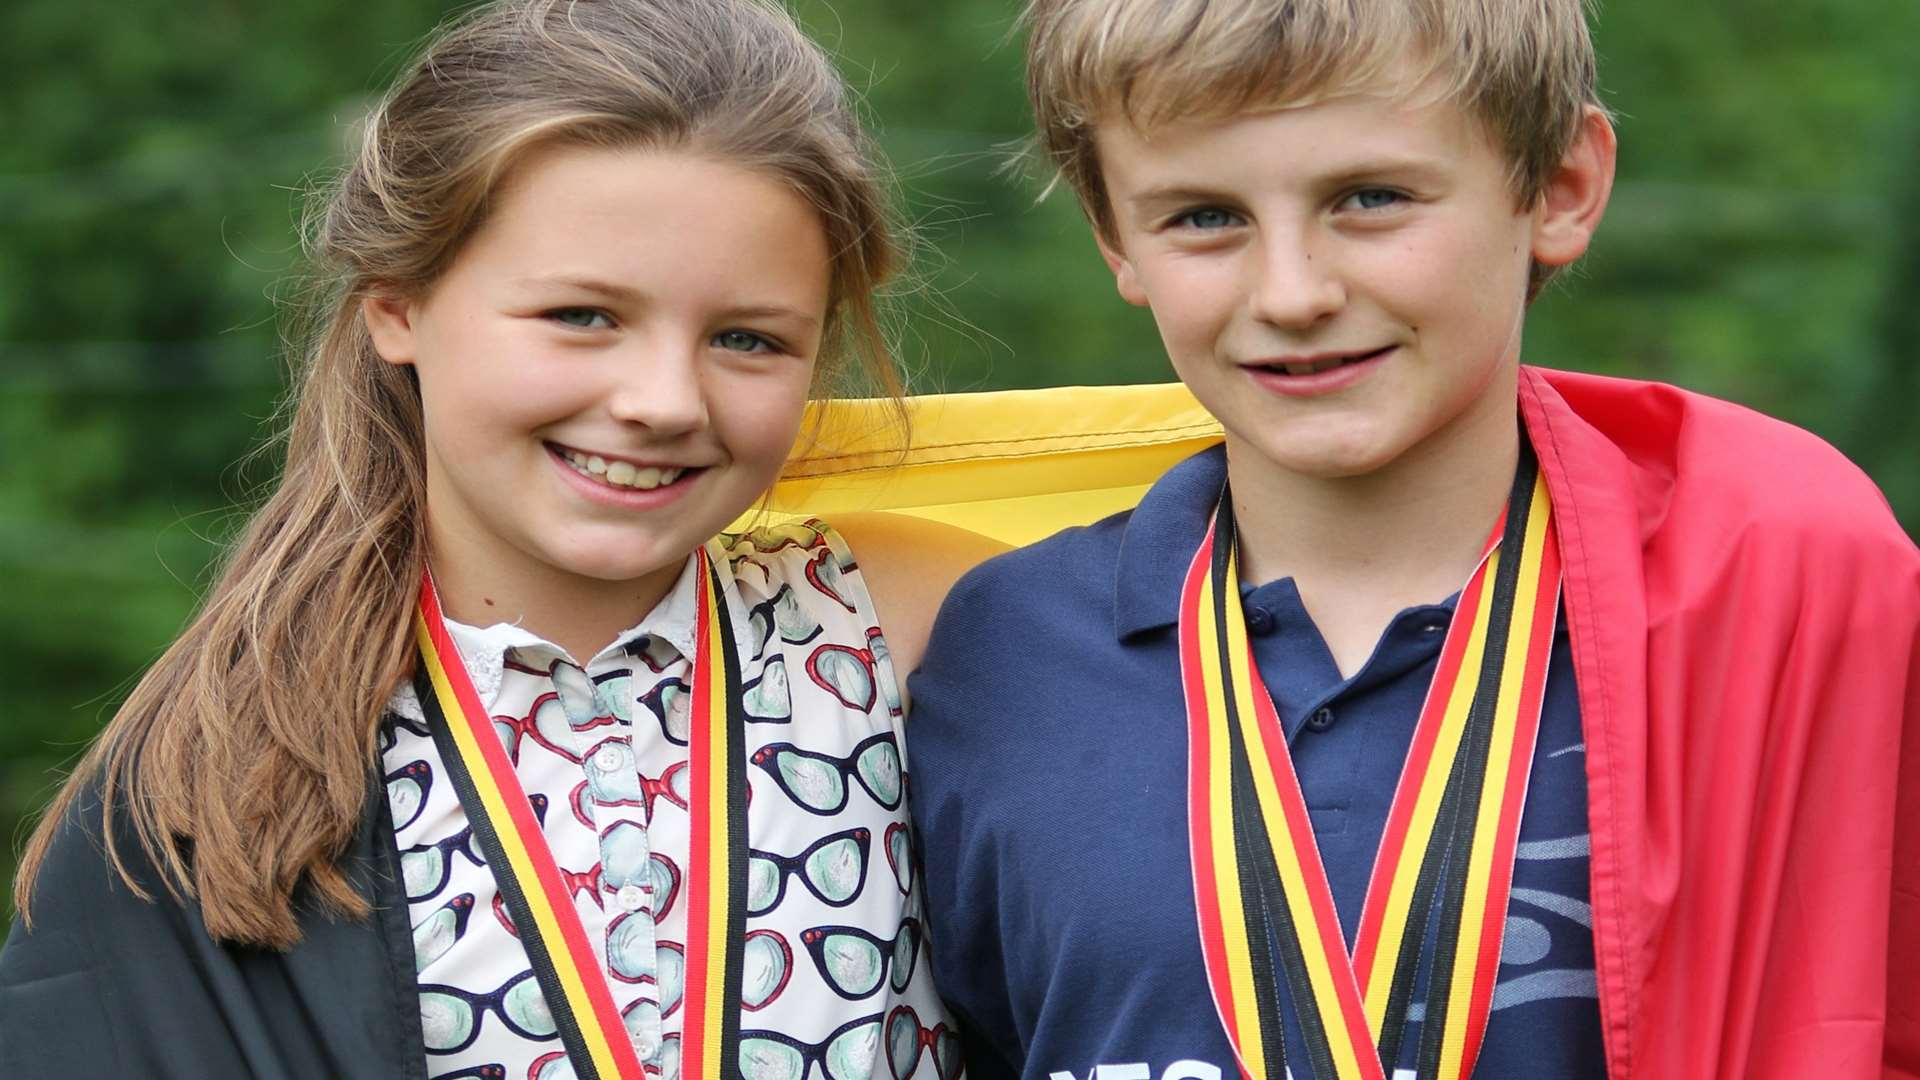 Siblings Thomas and Anna Leman both travelled to the land of their mother for the 2014 Championats De Belgique Natation (Belgian Age Group Championships).